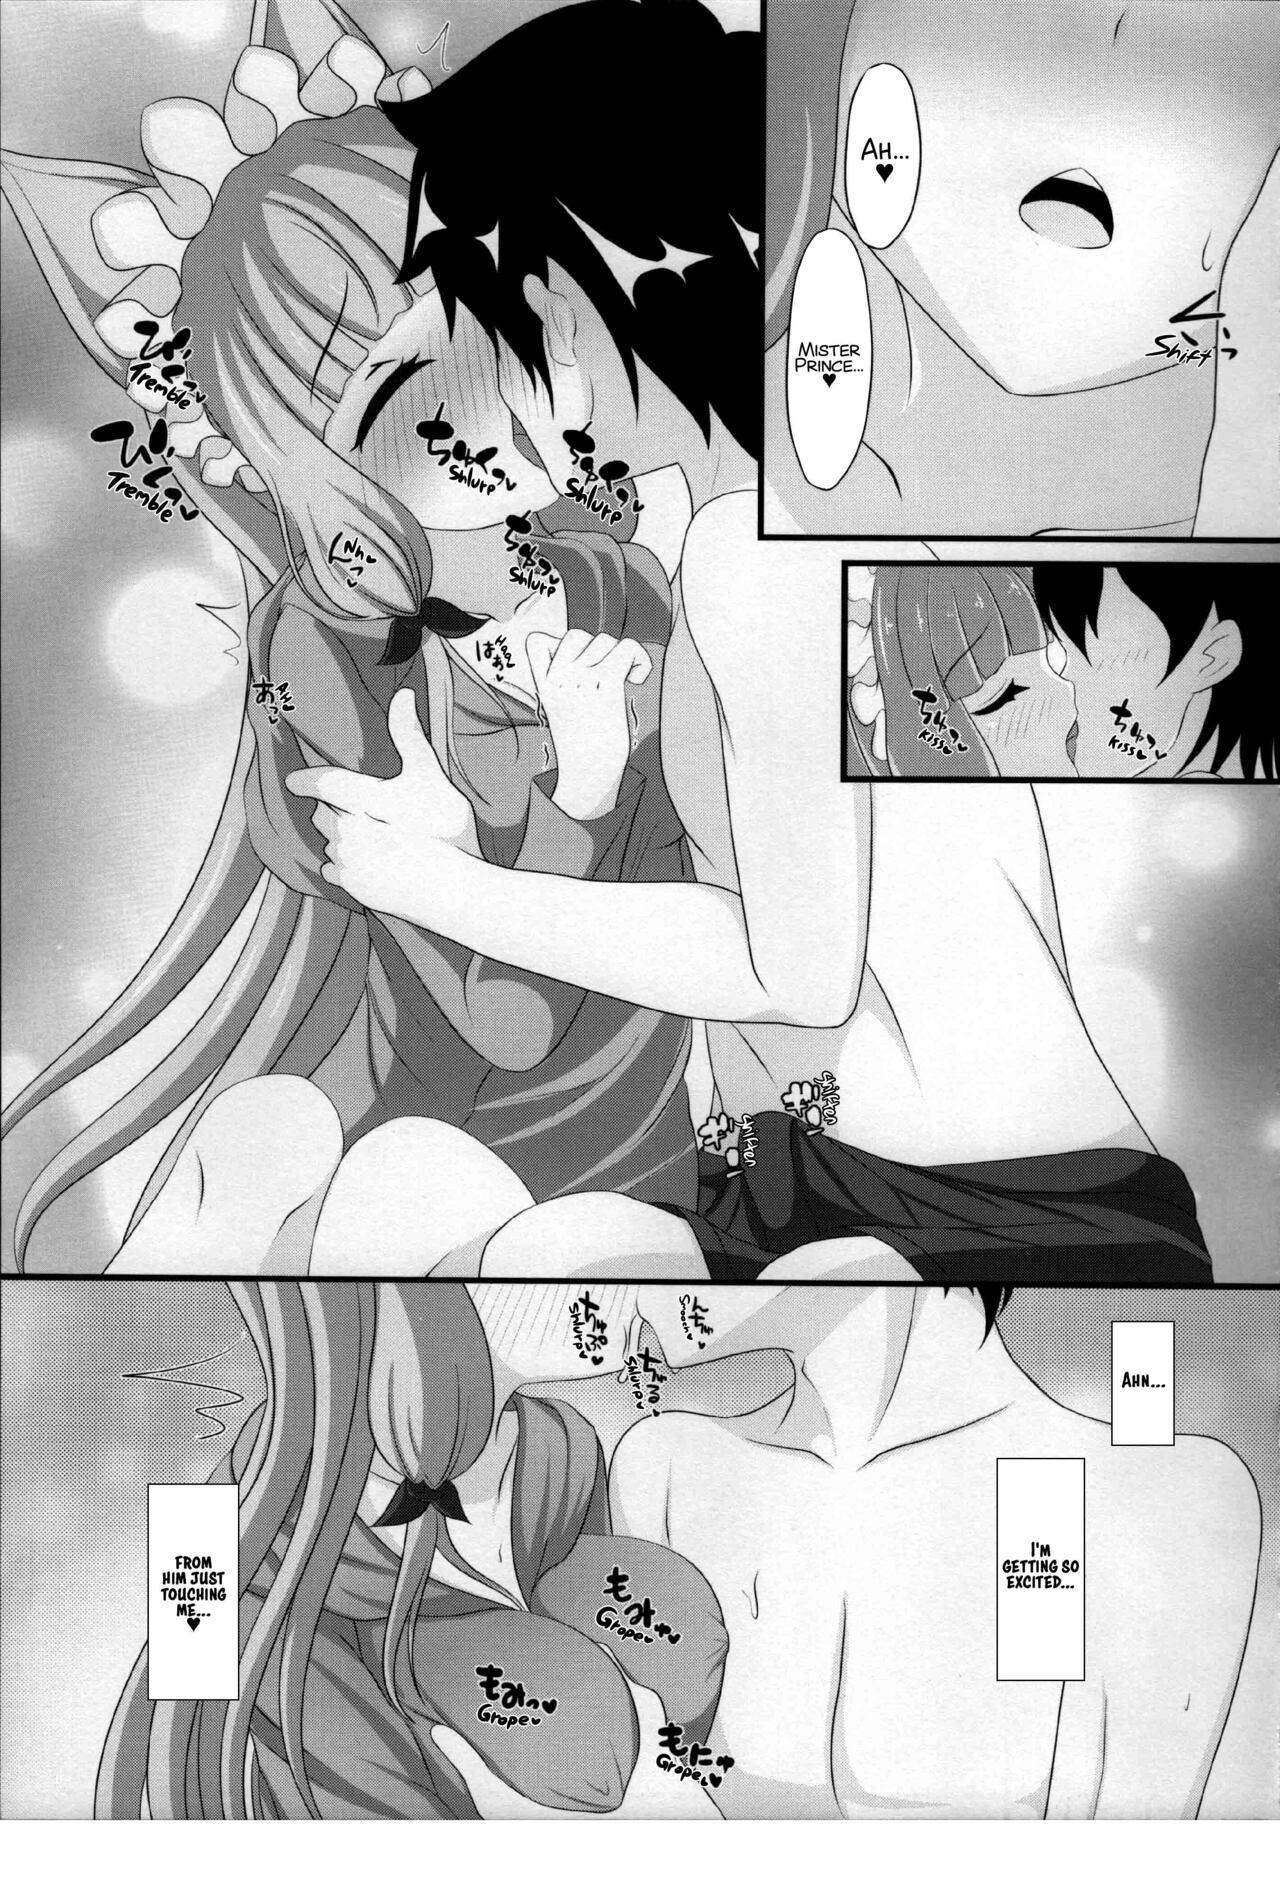 Beauty Maho Hime Connect! 2 - Princess connect Assfucking - Page 8